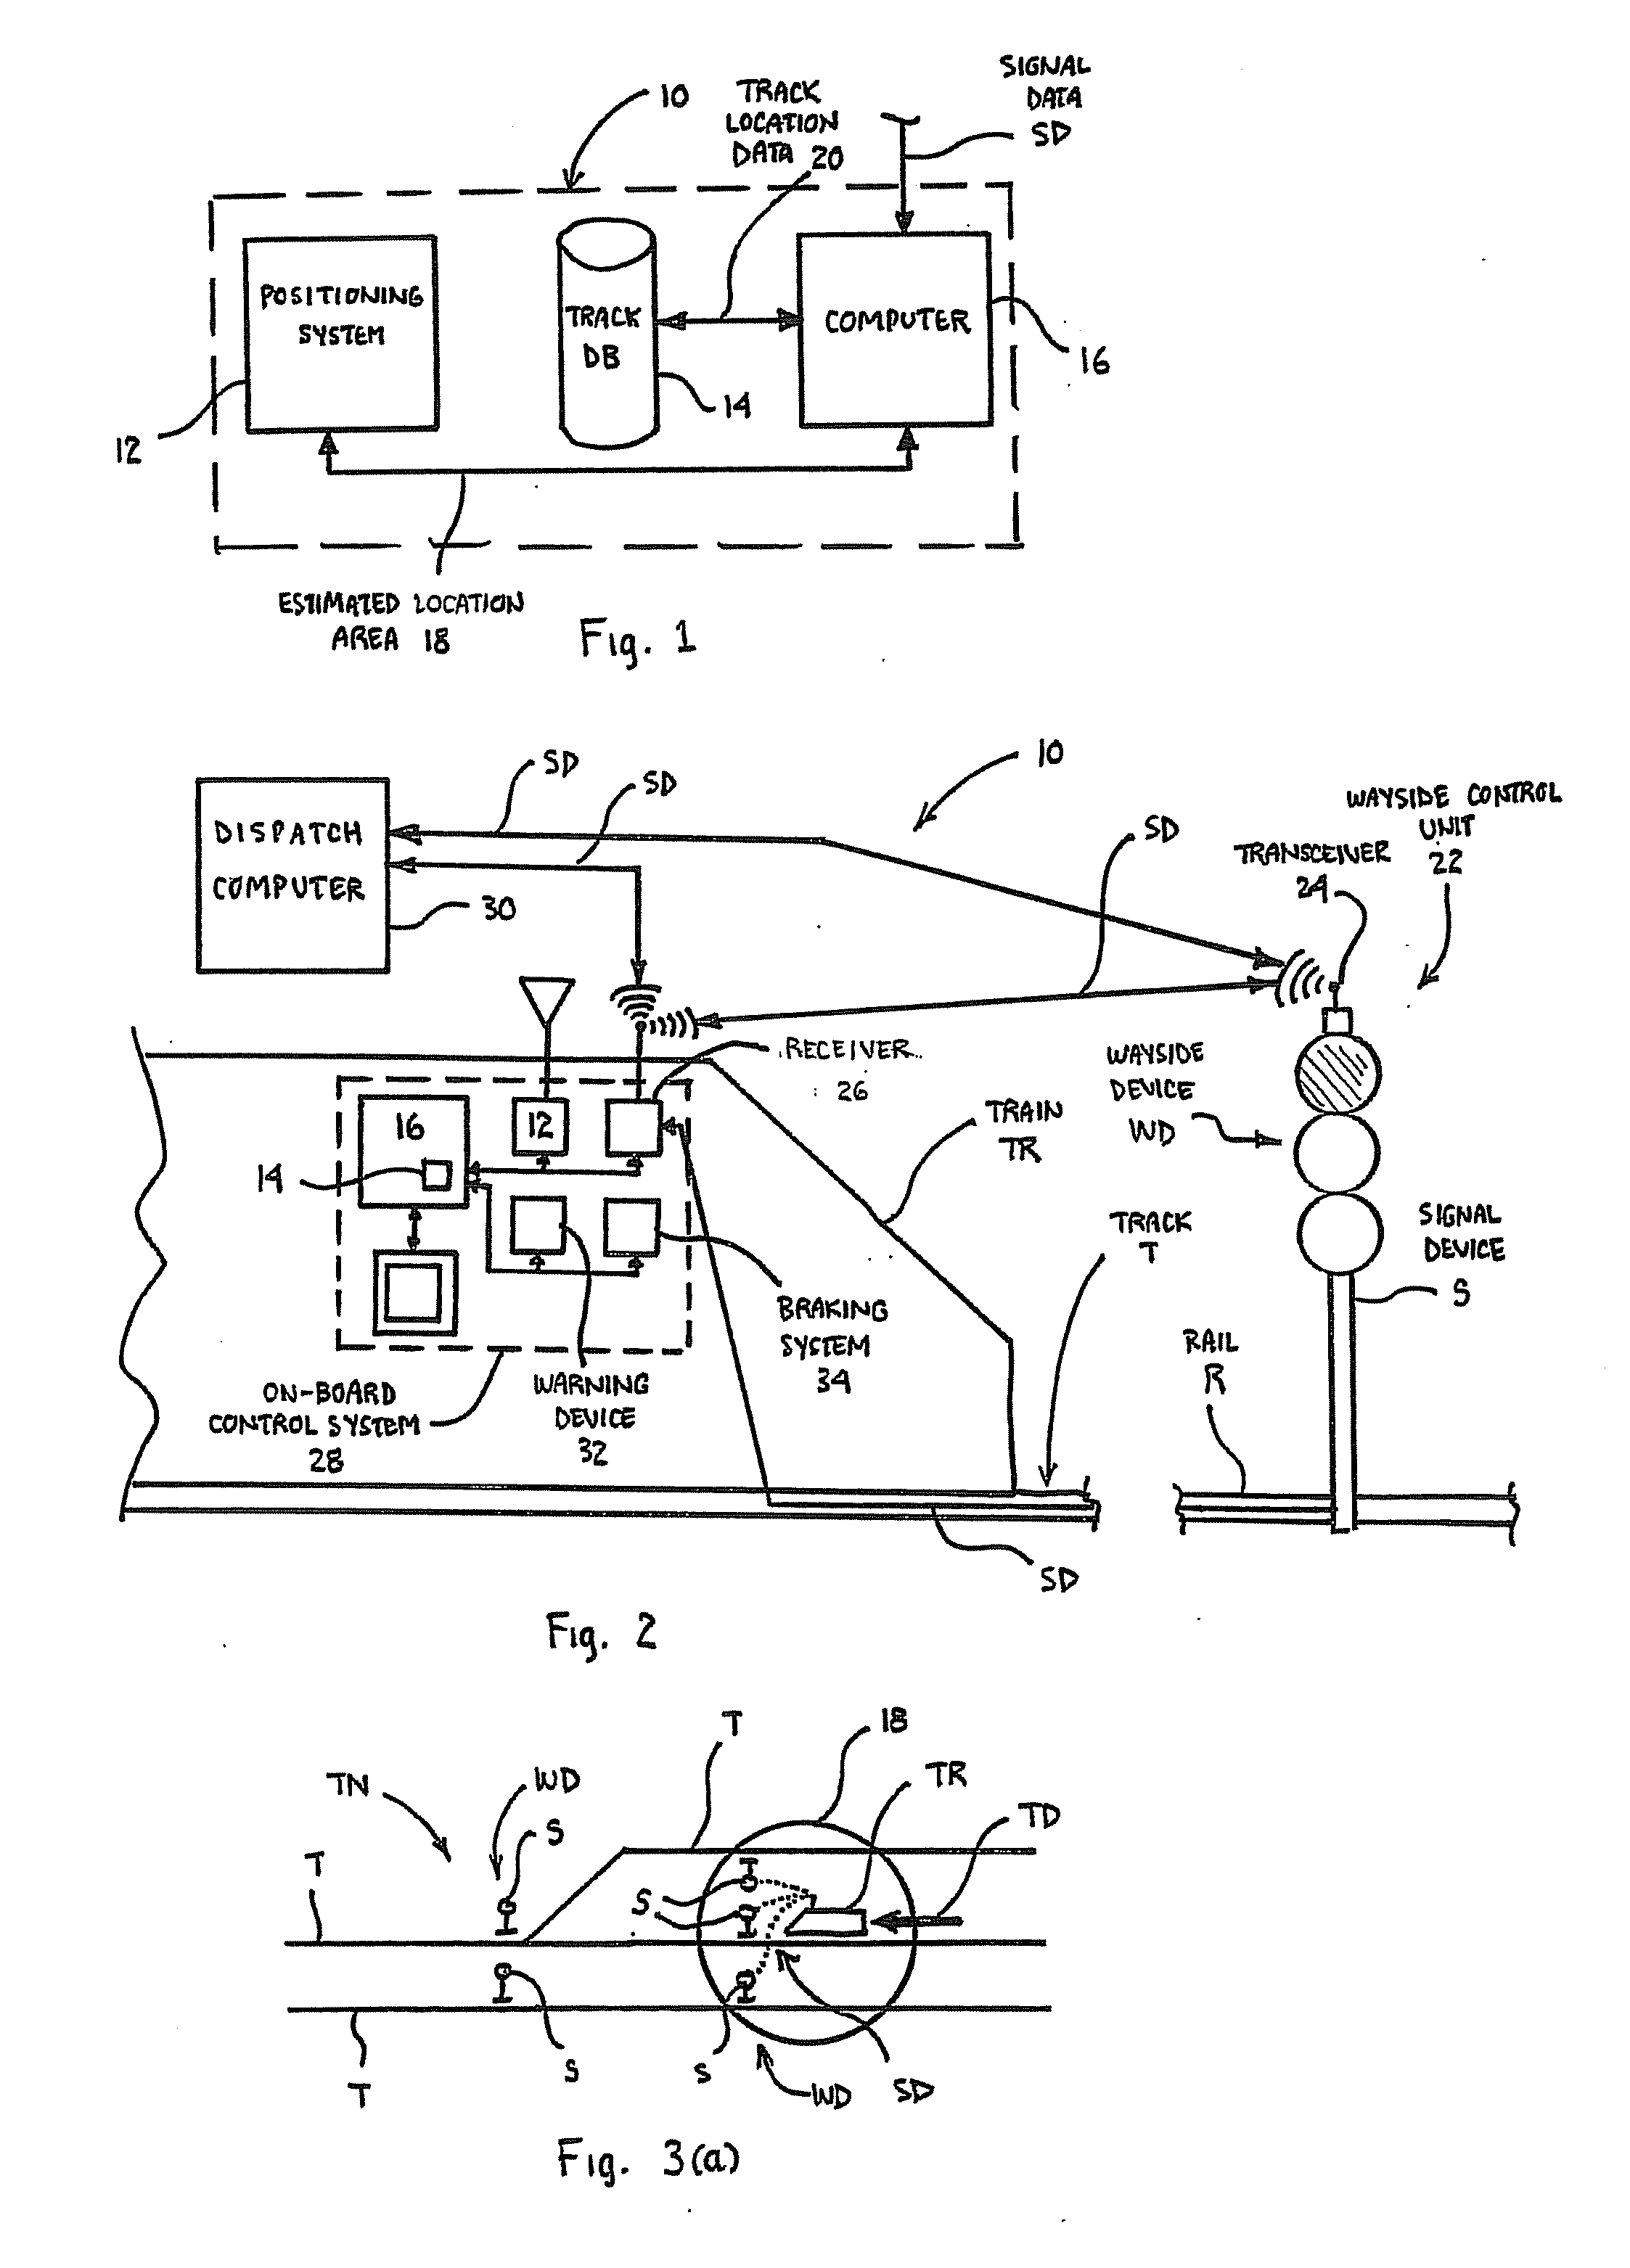 System and Method to Determine Train Location in a Track Network